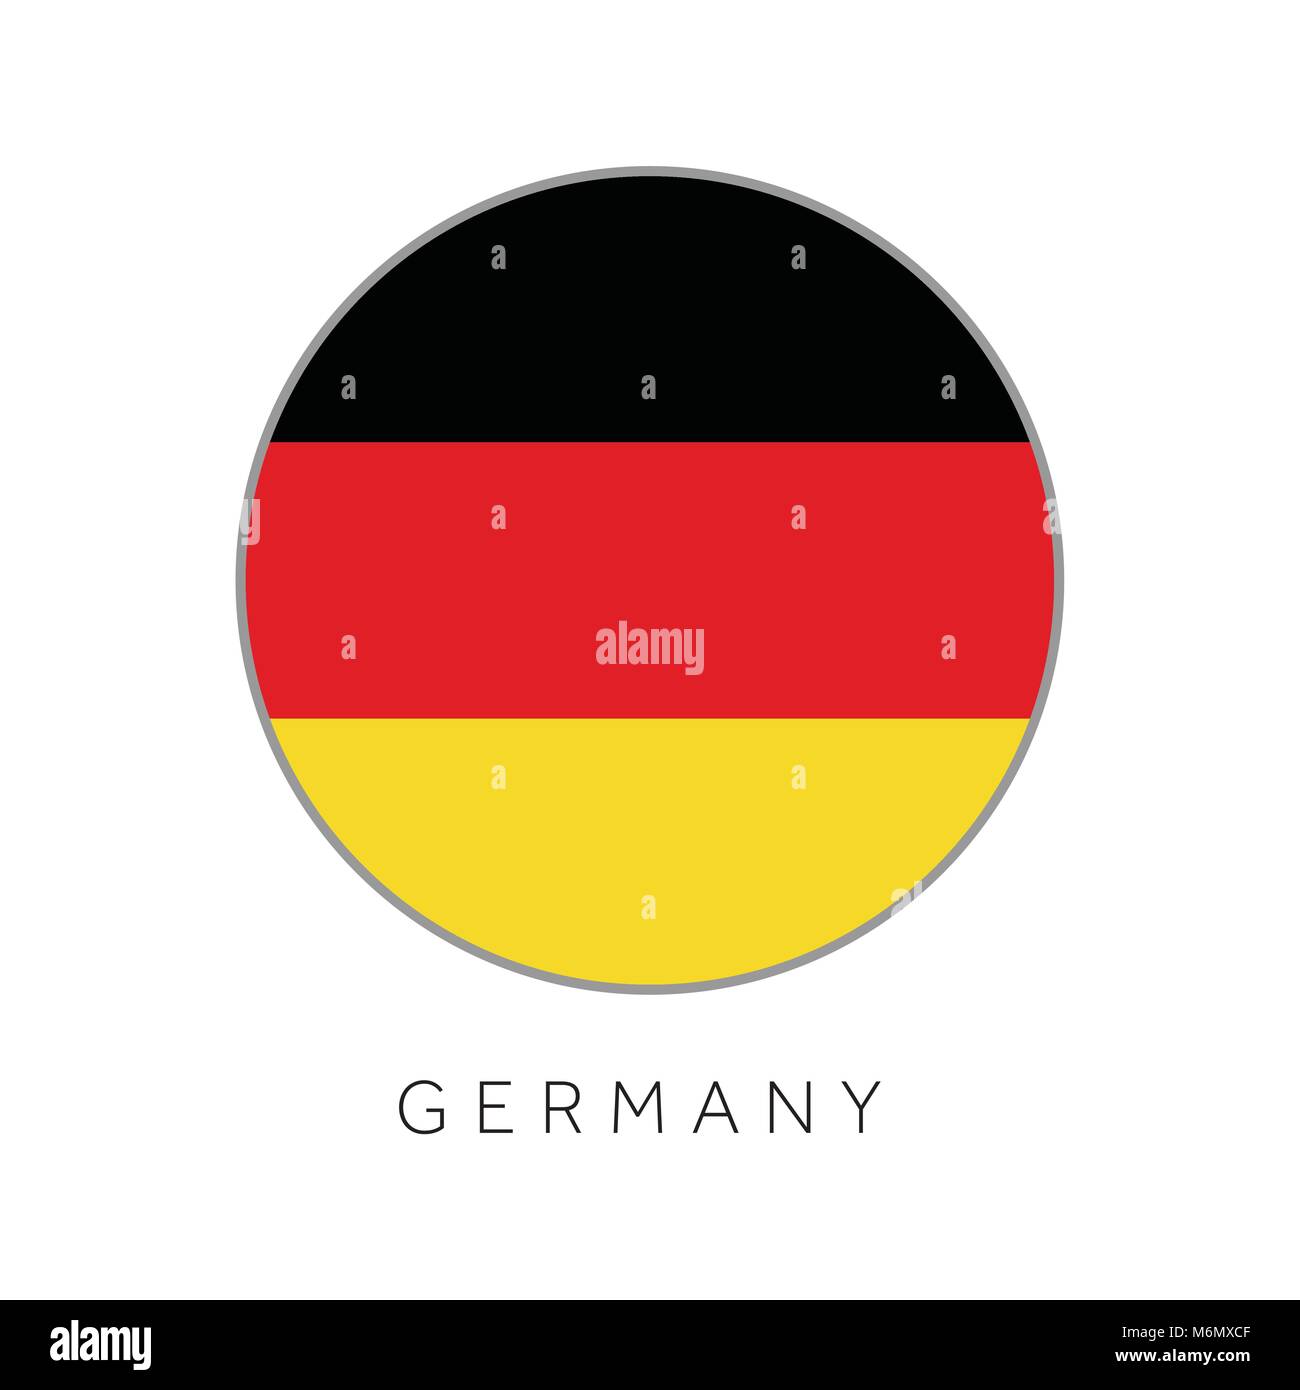 Sticker On Car, Flag Of Germany, Germania, Deutschland With The